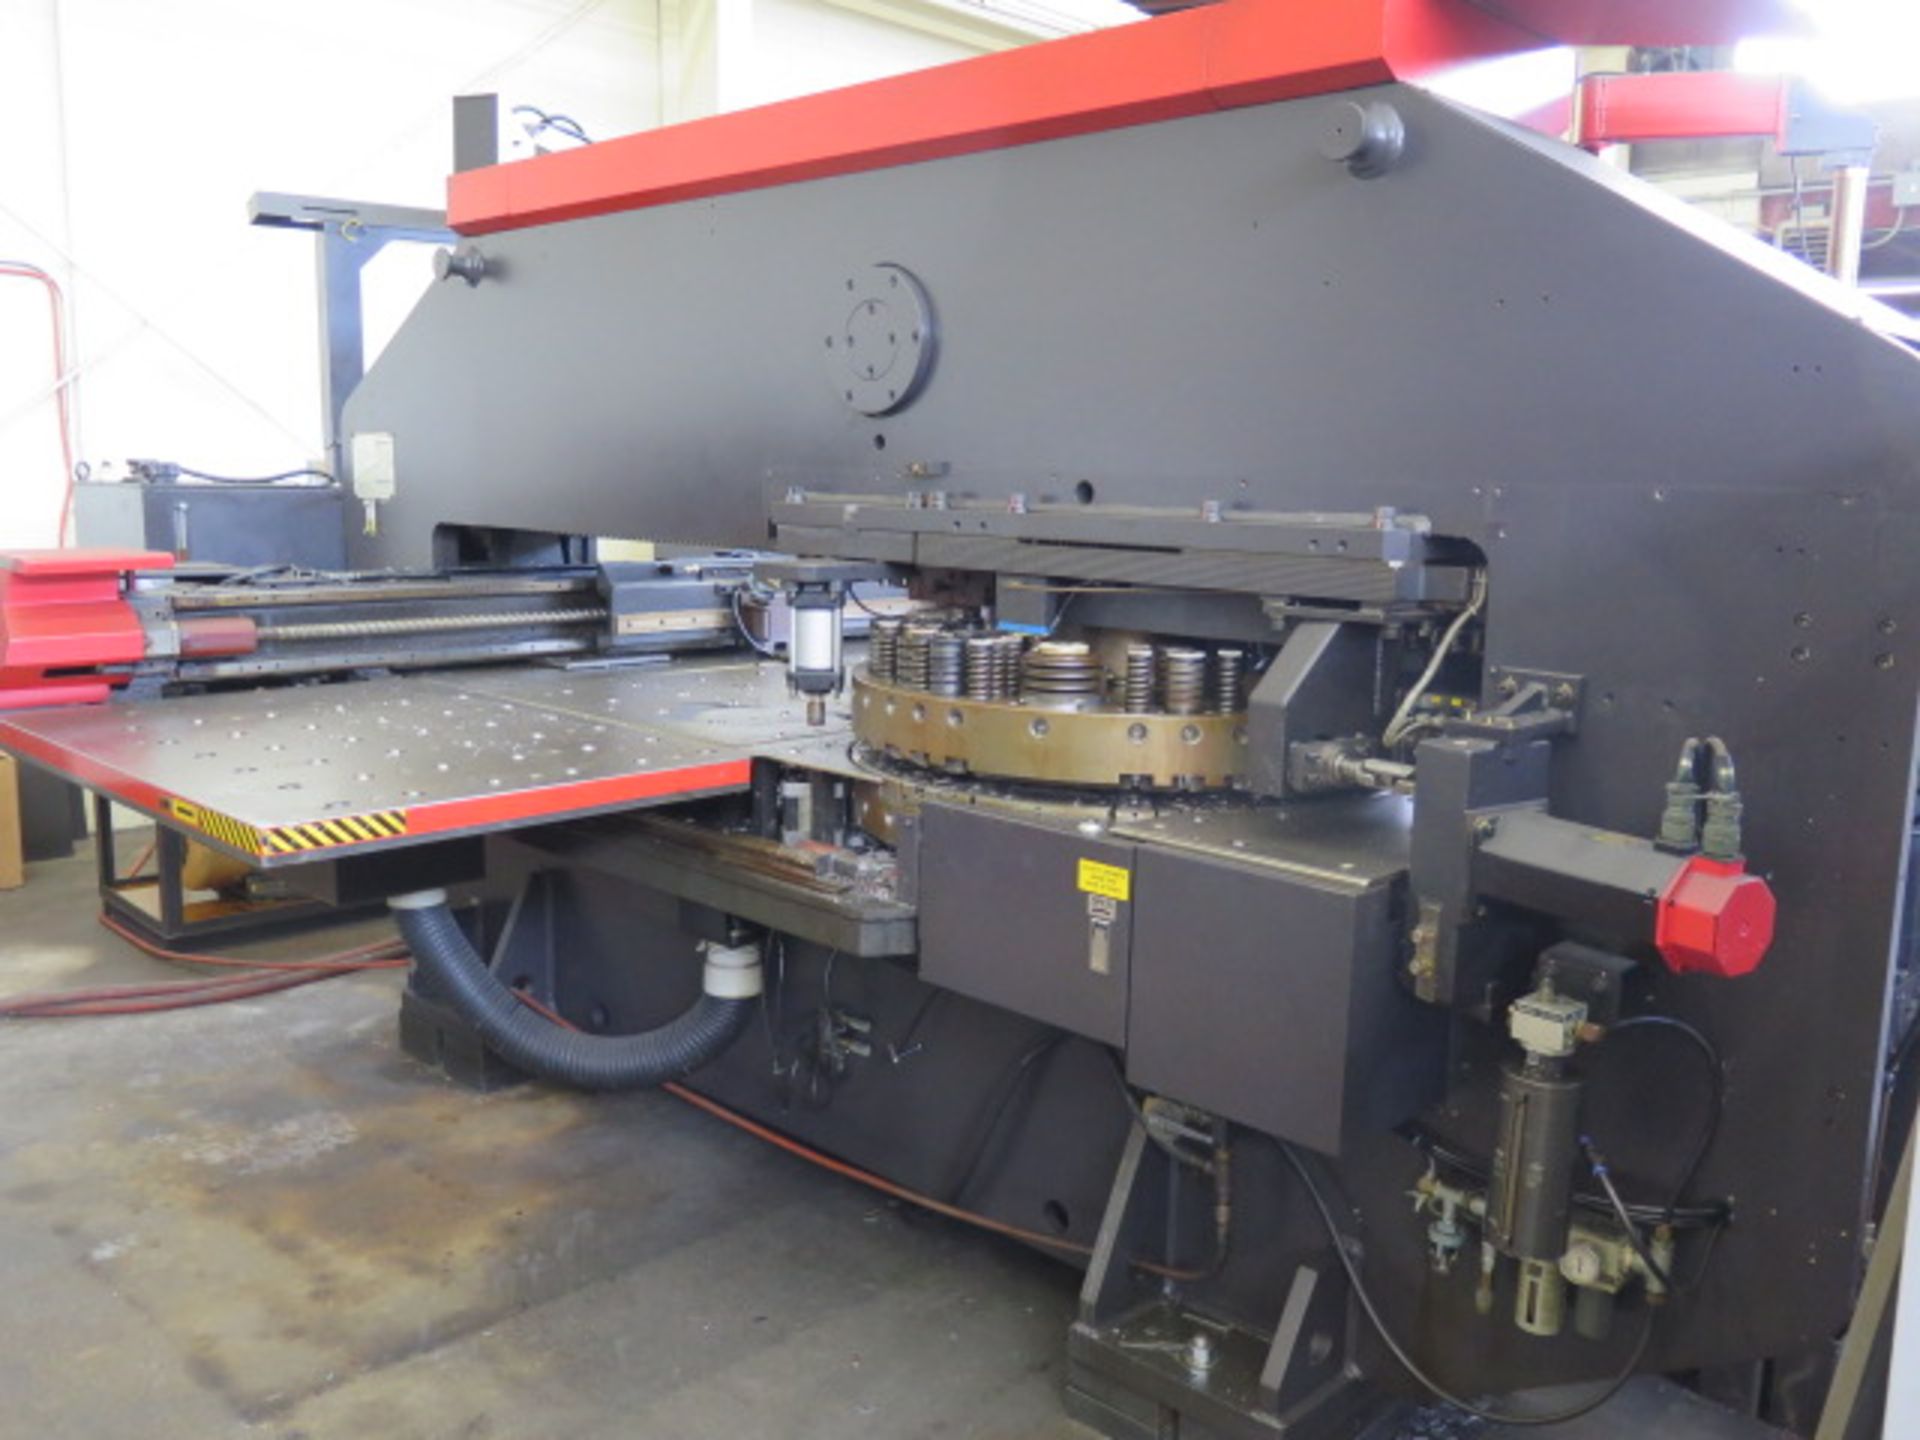 Amada VIPROS 345 30-Ton CNC Turret Punch Cell s/n 34510153 w/ 04P-C Controls, 58-Station, SOLD AS IS - Image 8 of 28